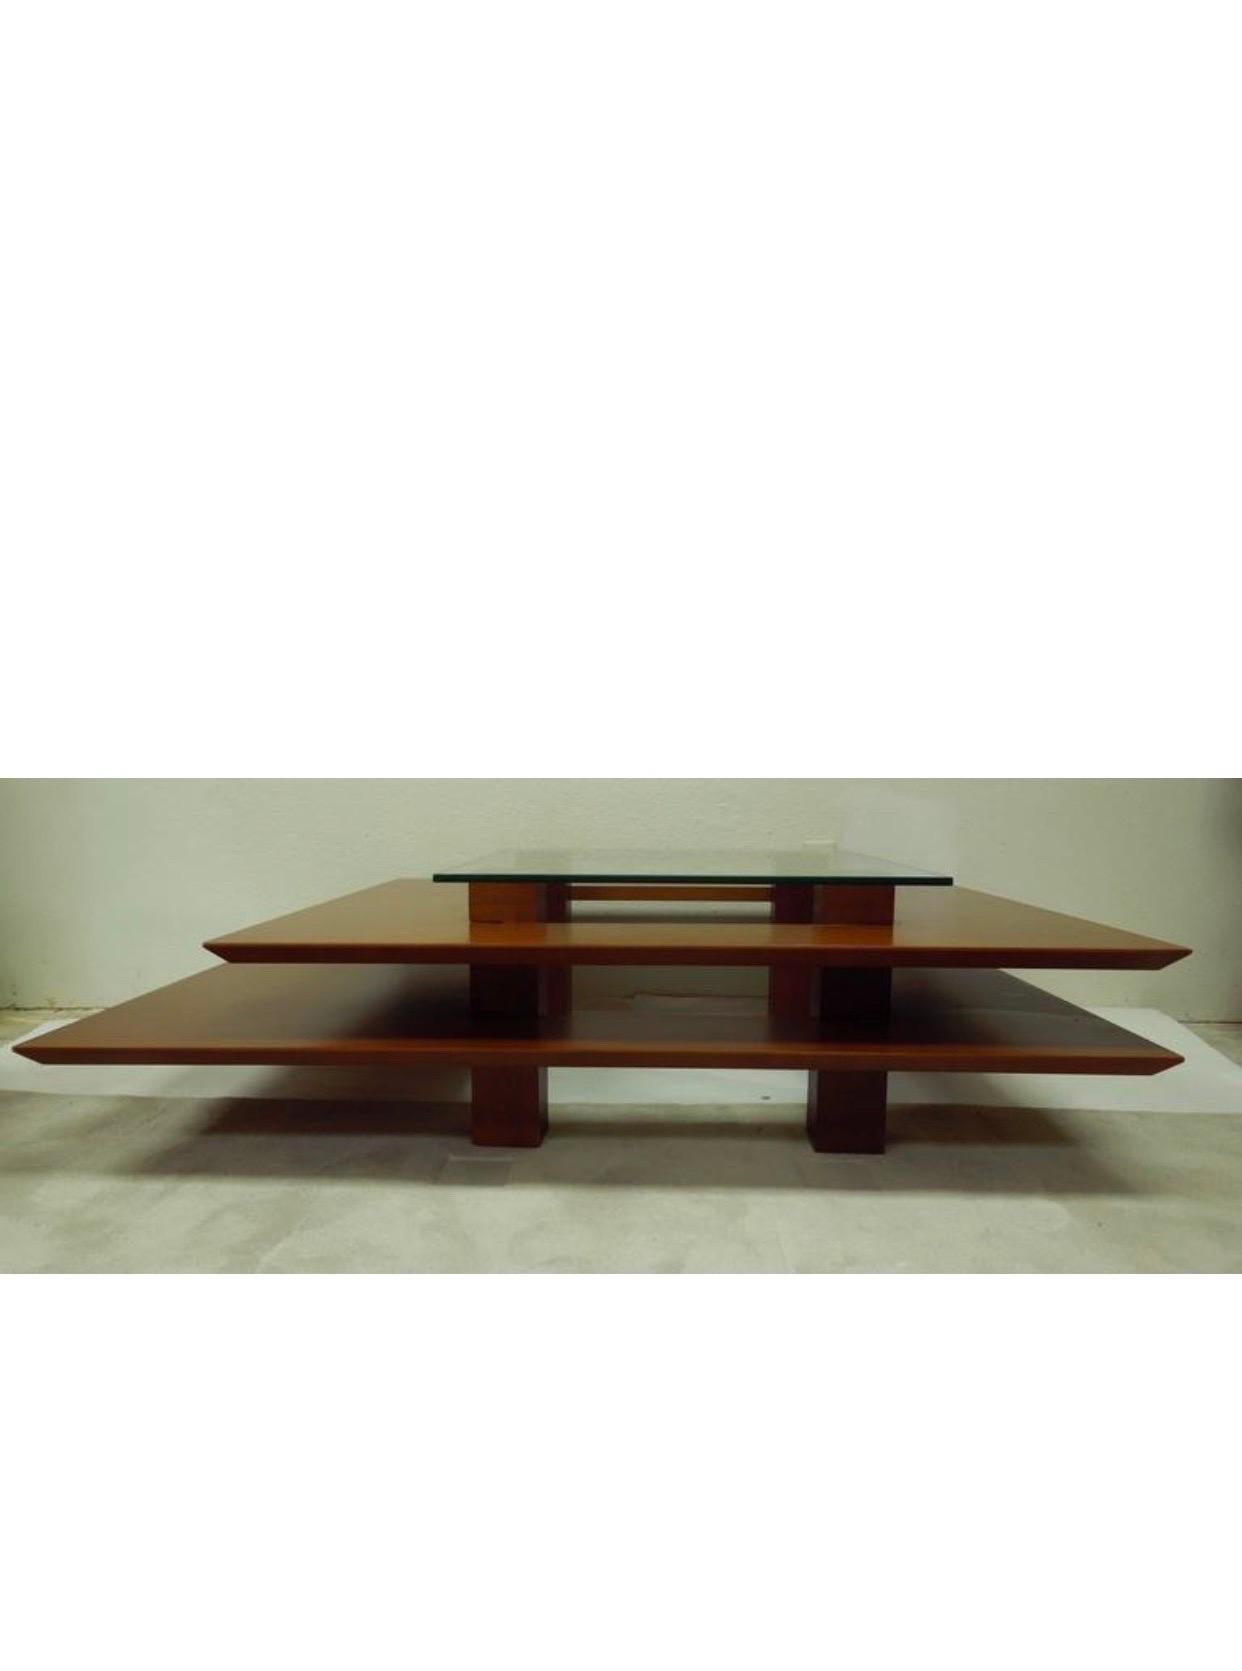 Clemmer Heidsieck Three-Tier 1990s French Modern Coffee Table In Good Condition For Sale In Palm Springs, CA